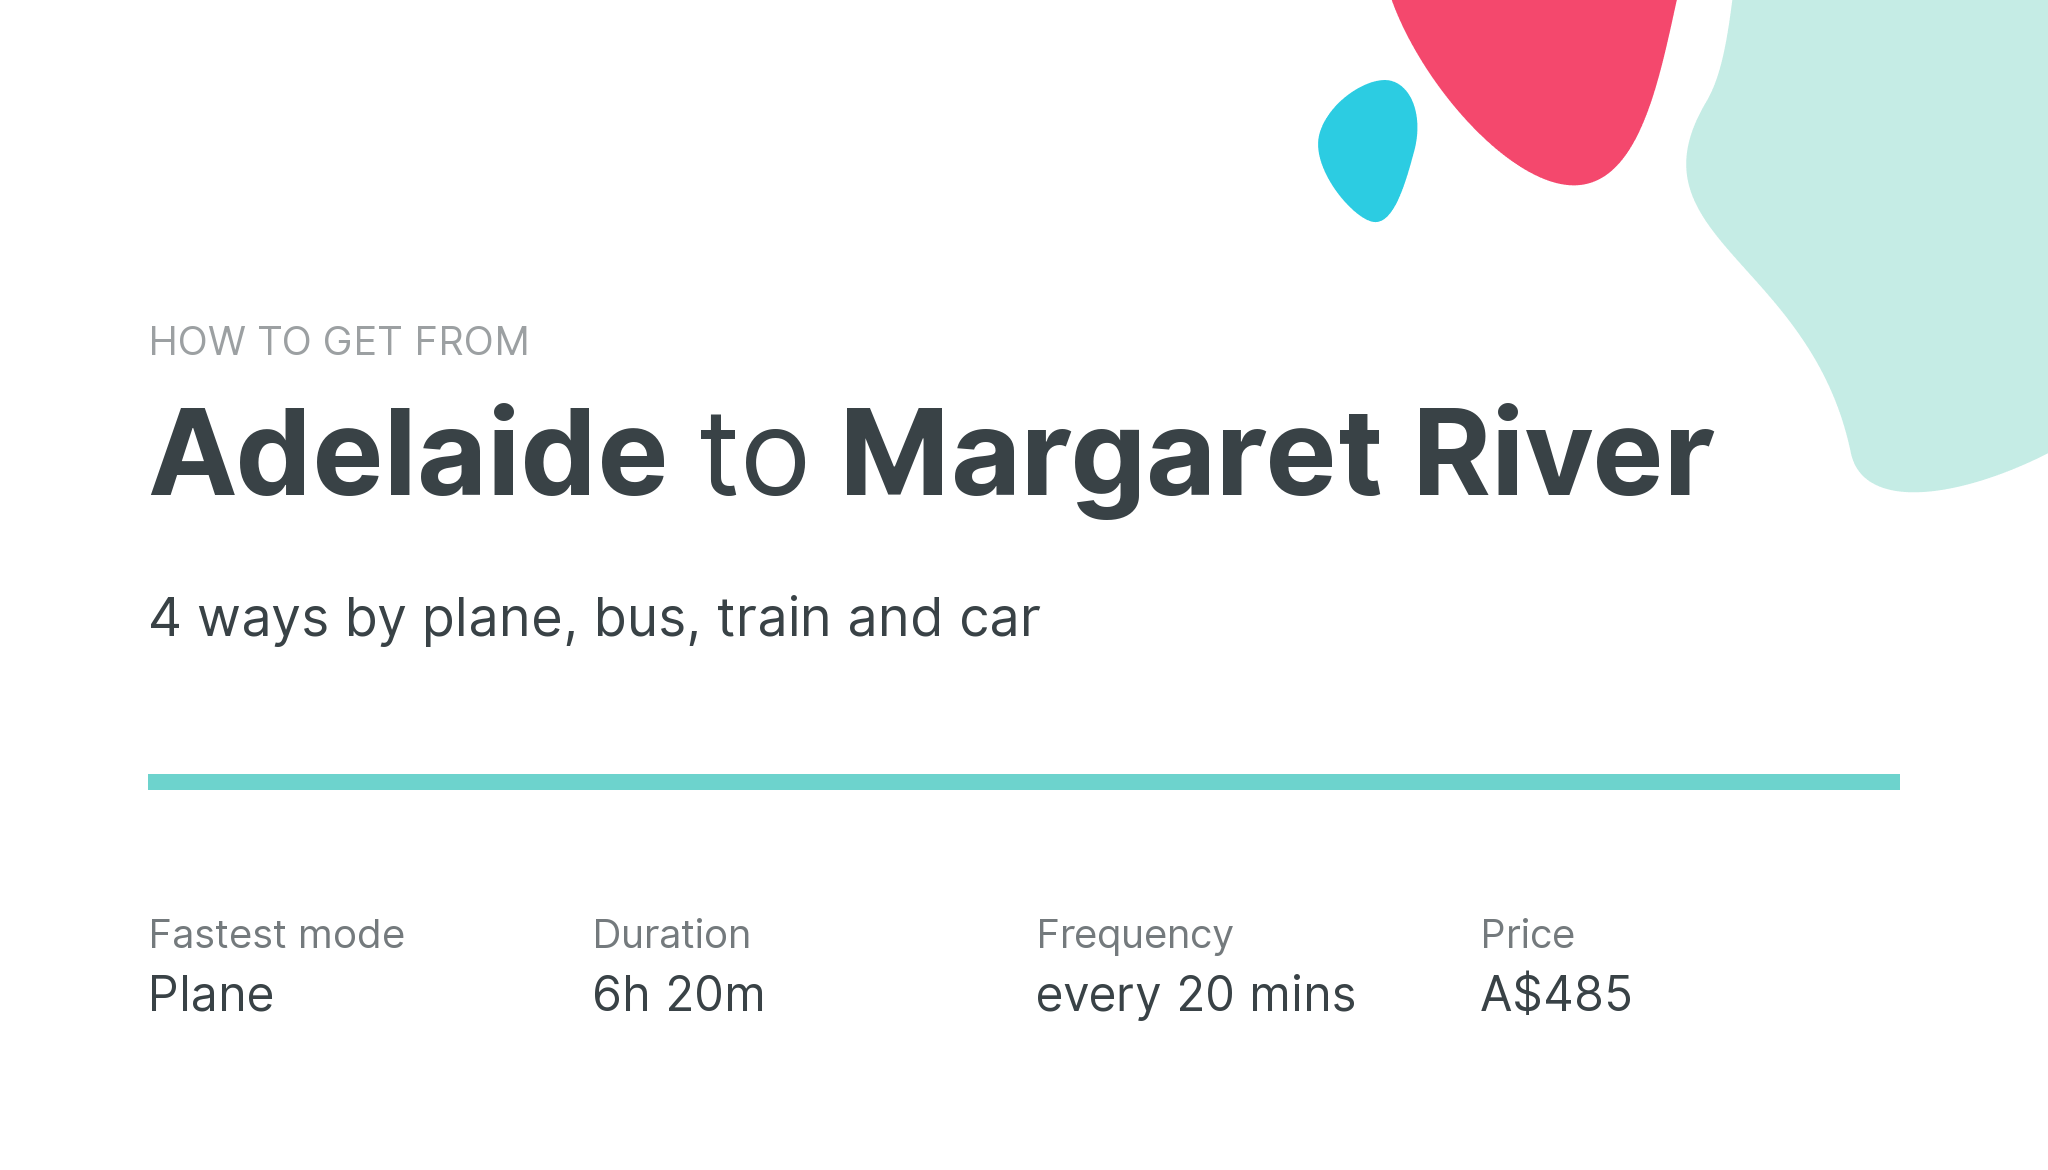 How do I get from Adelaide to Margaret River